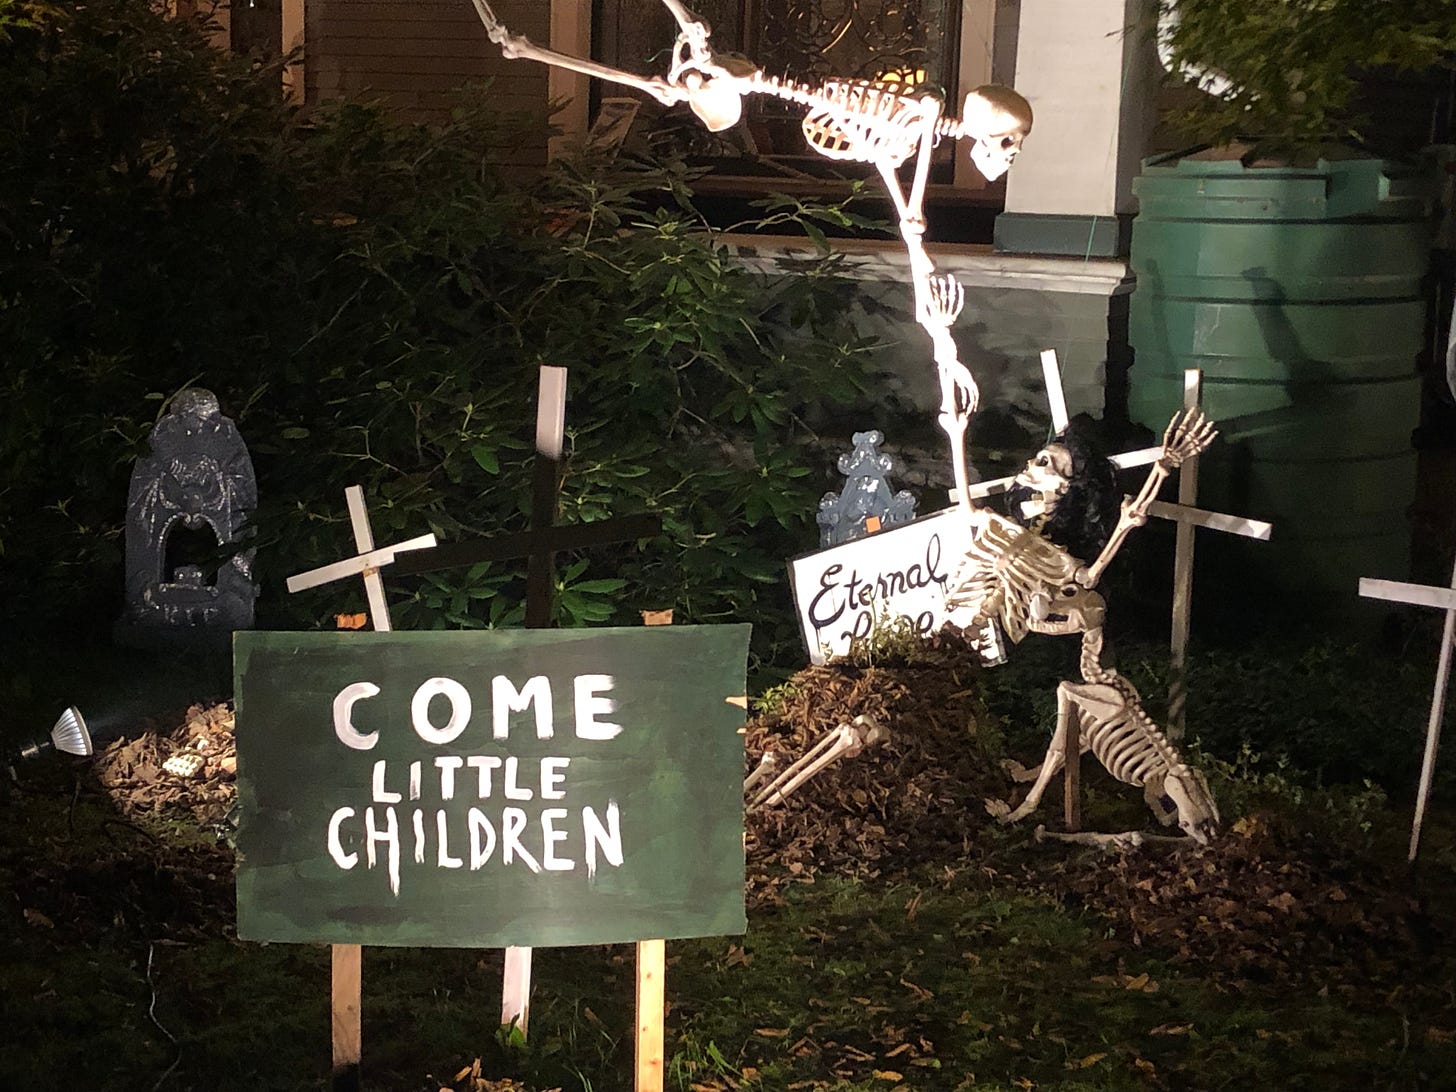 two skeletons in a graveyard with a sign that says "come little children"